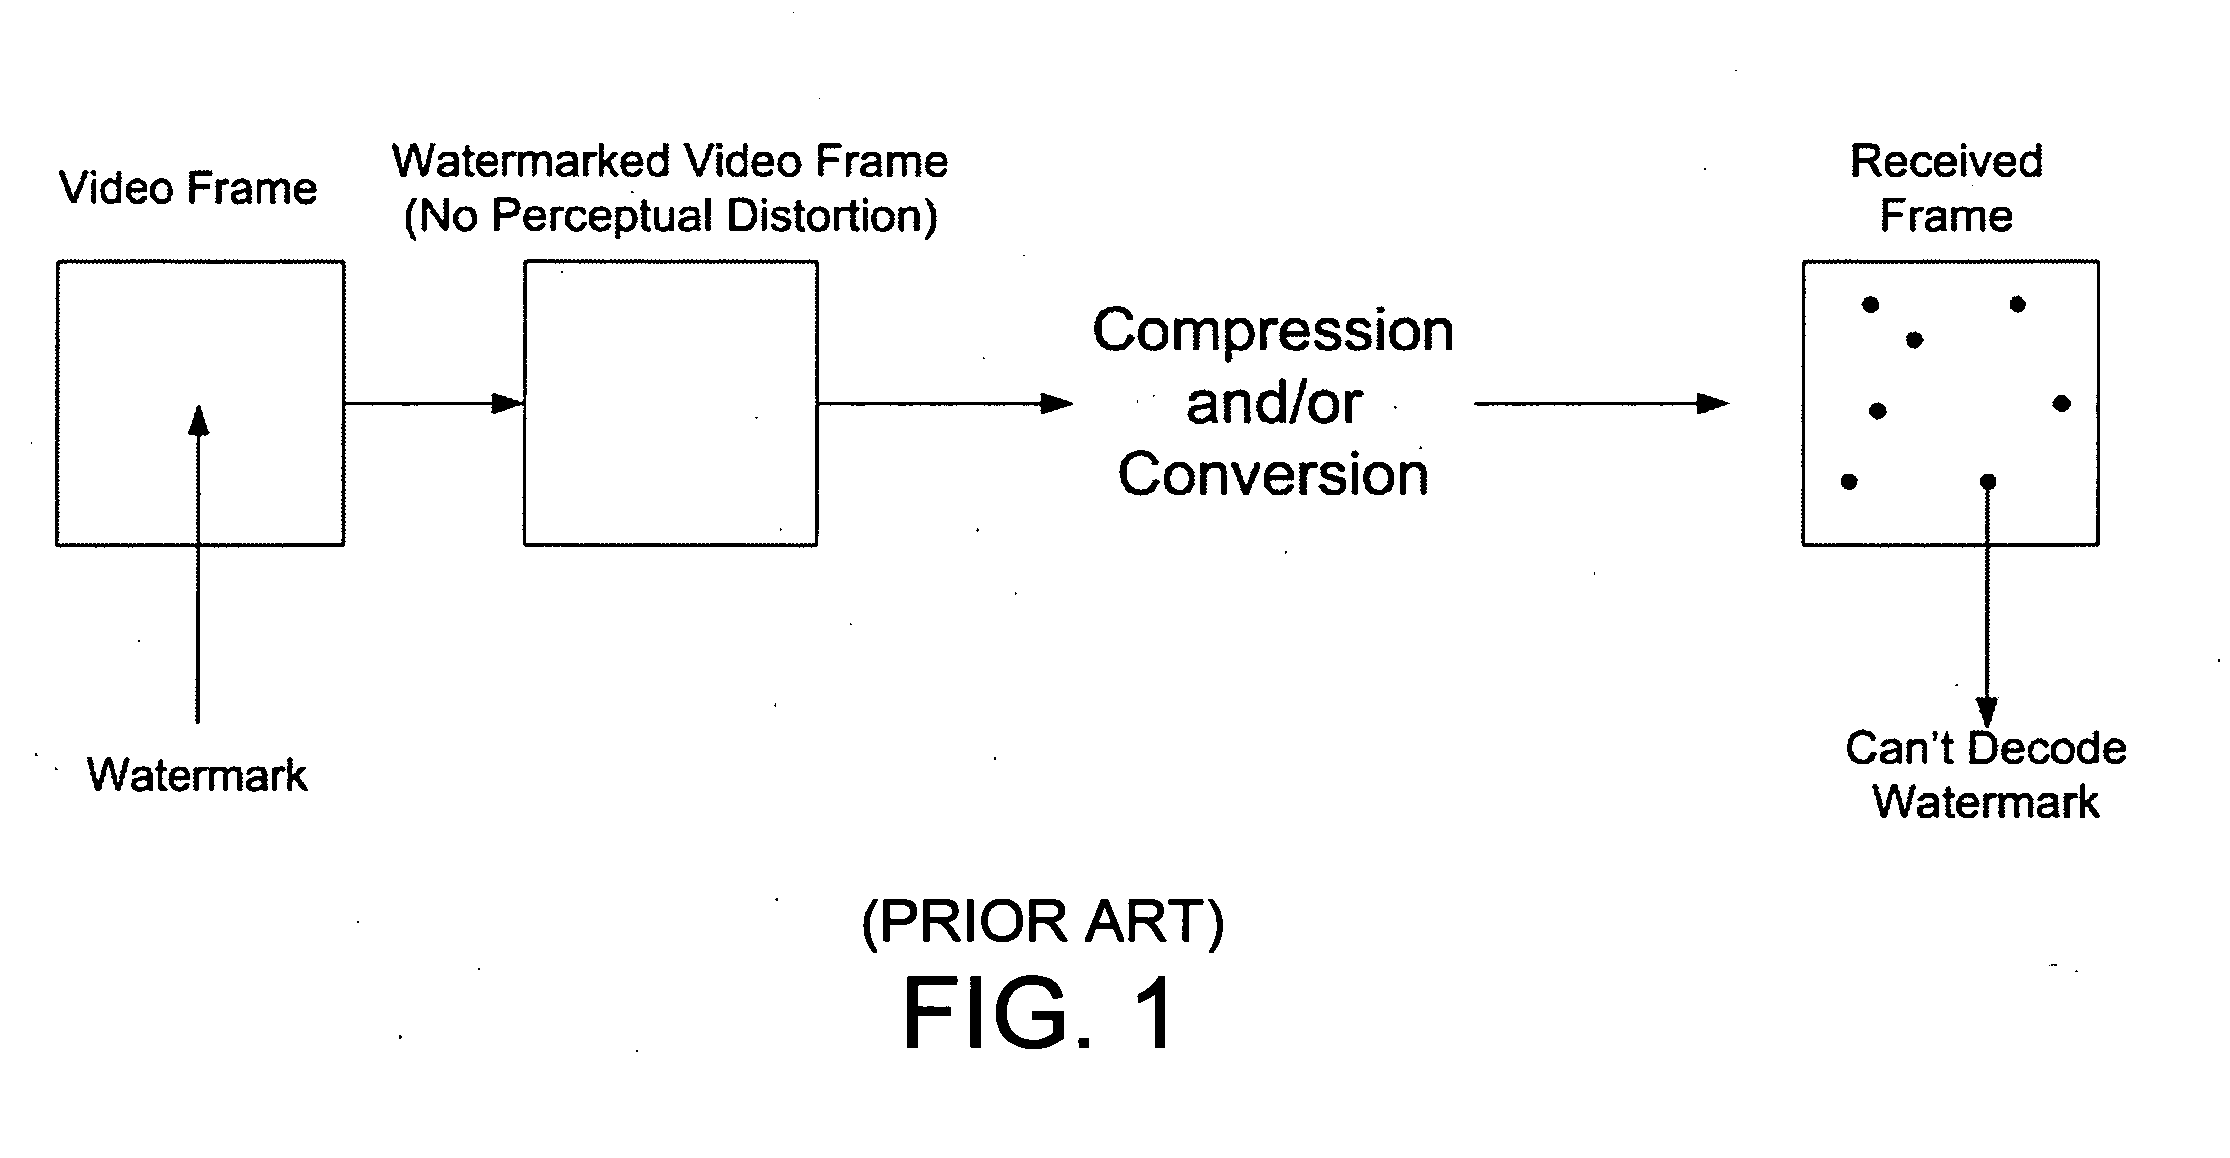 Video monitoring involving embedding a video characteristic in audio of a video/audio signal